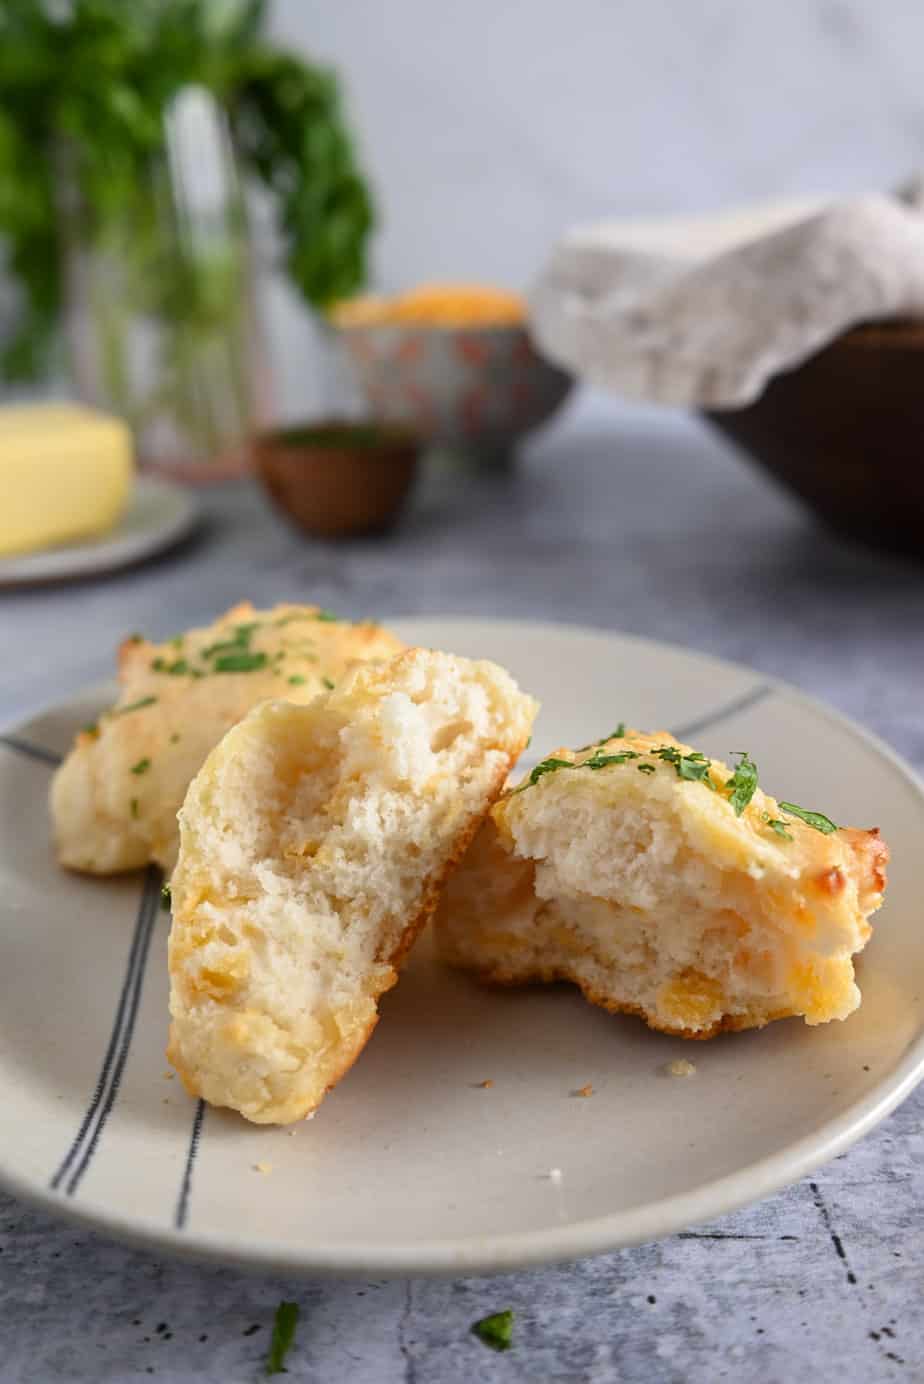 Two homemade red lobster biscuits on a plate. One of the biscuits is broken in half to show the fluffy inner texture.